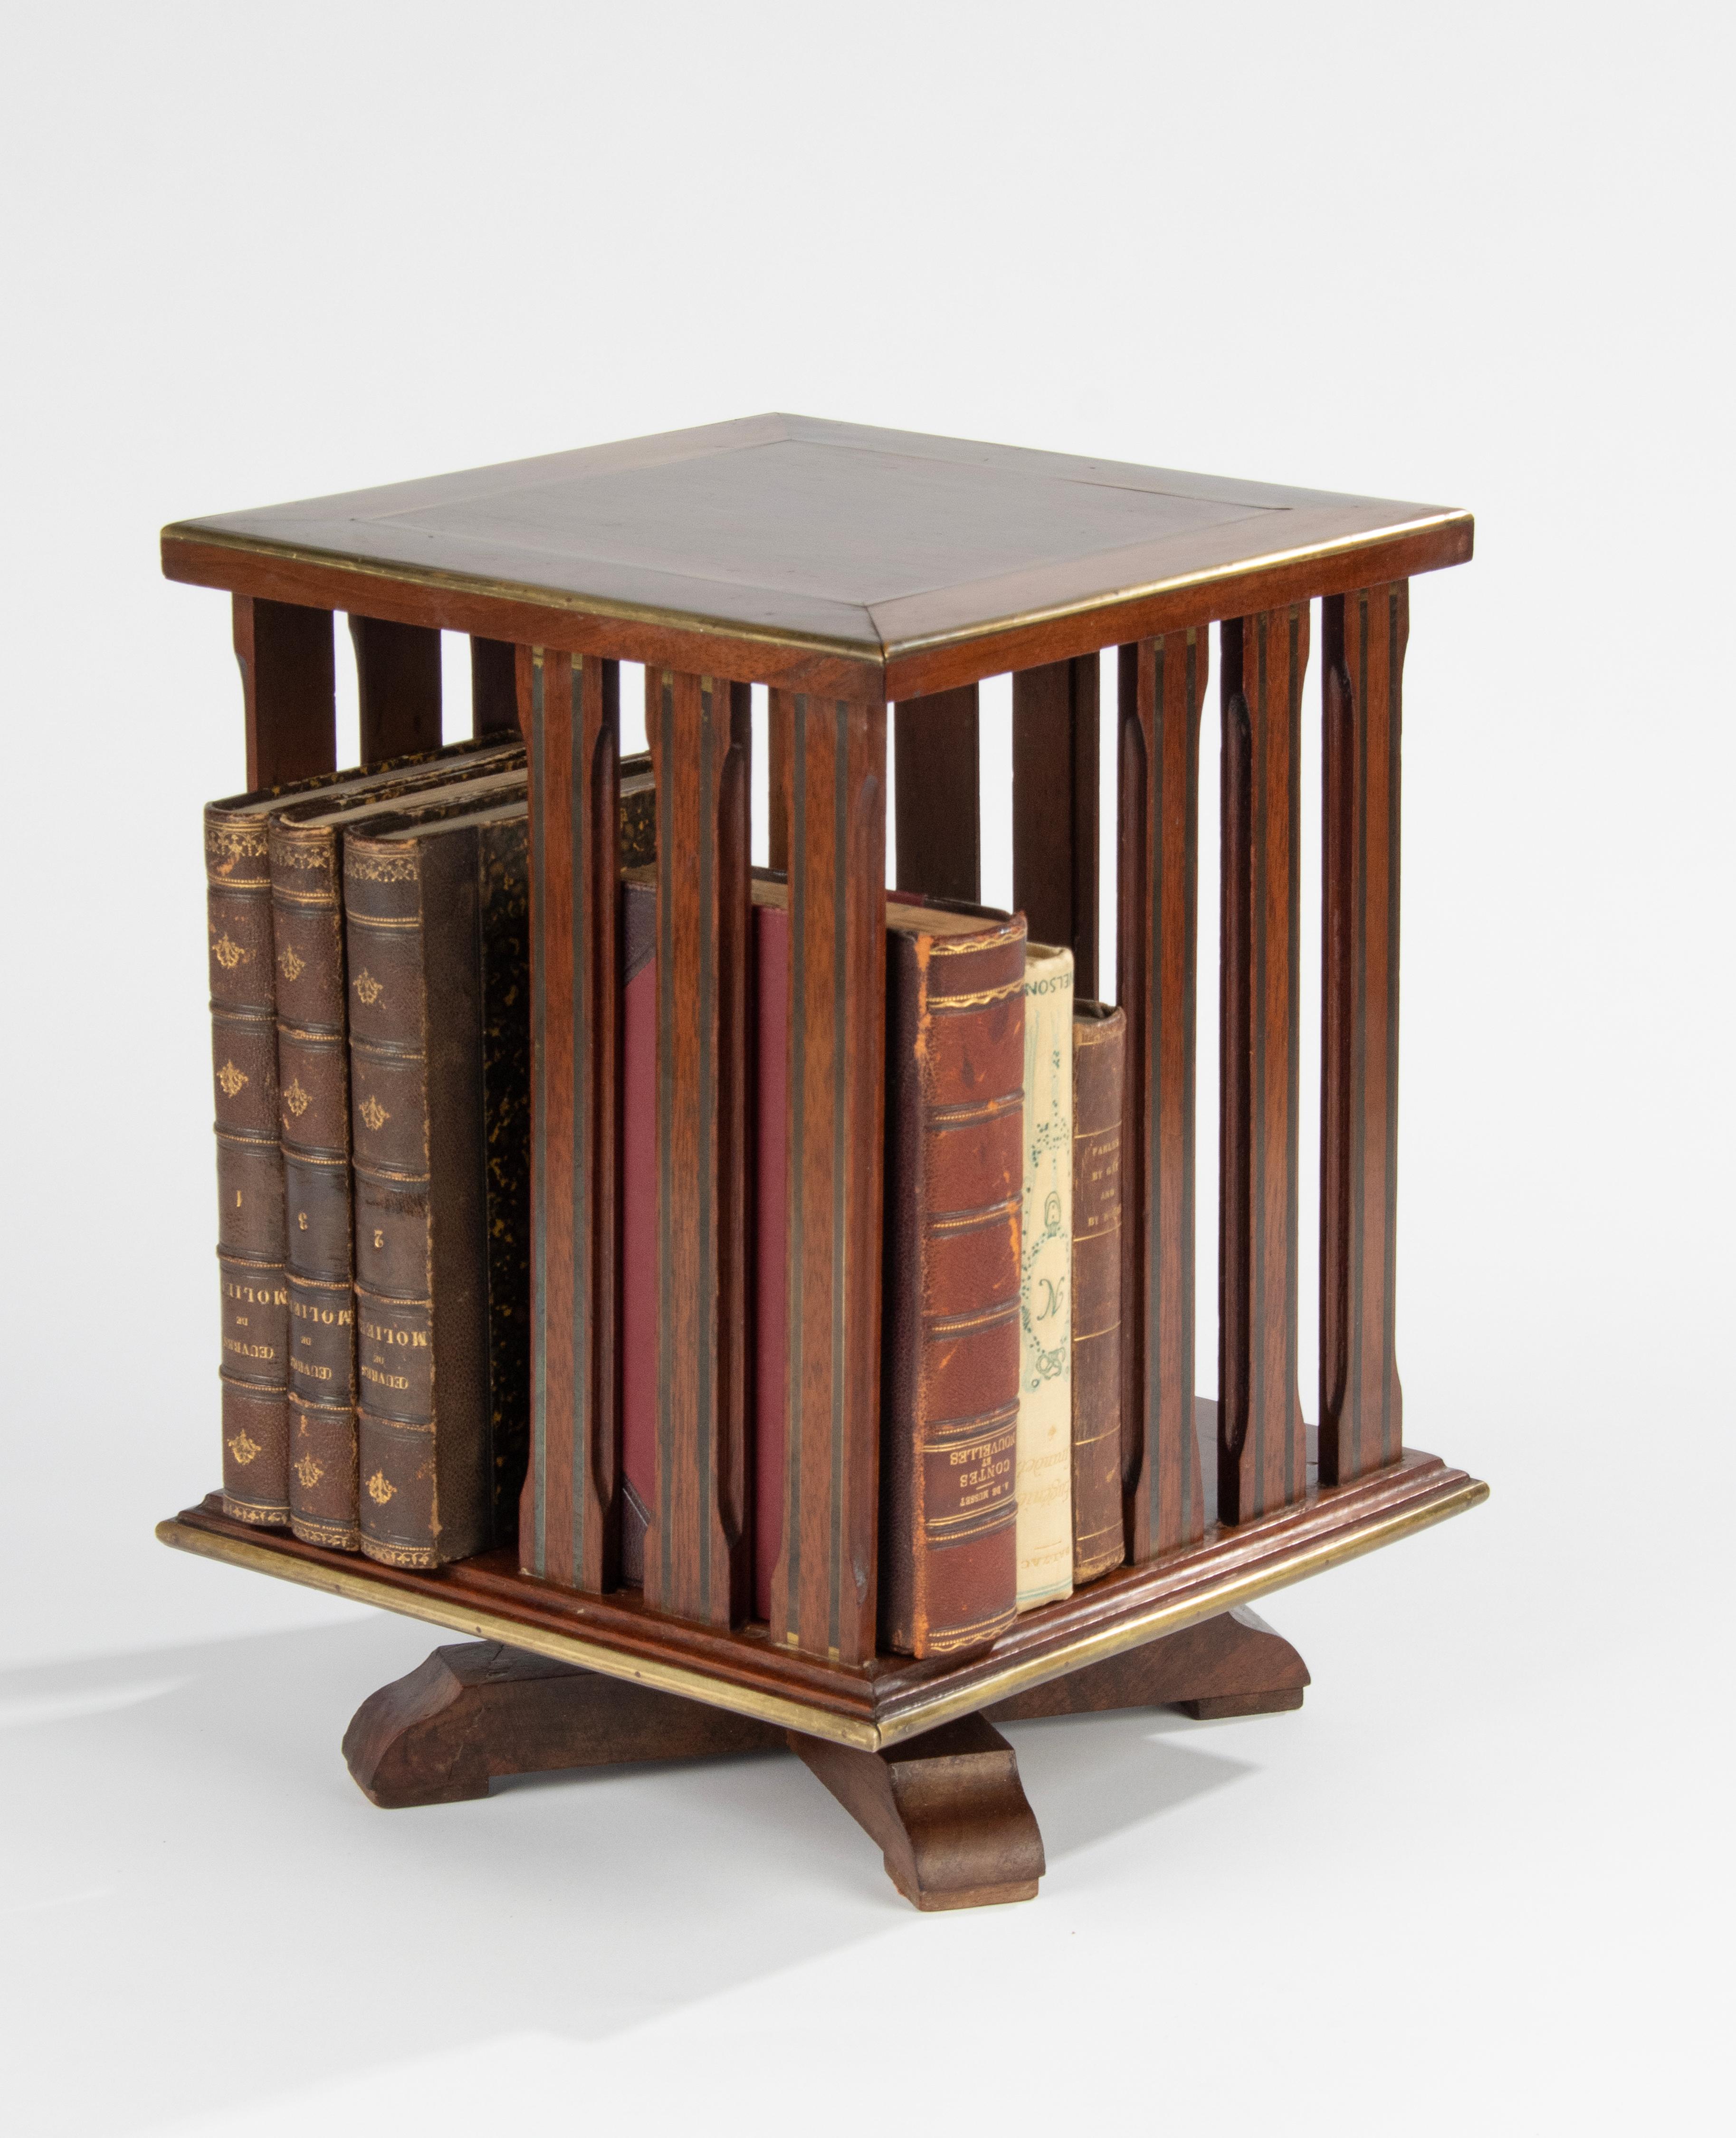 An antique compact book mill with rotating function. The bookmill is made of solid mahogany wood, inlaid with copper and zinc .It has four storage compartments. Made in France, around 1880-1890. Nice desk accessory.
Dimensions: 32 (h) x 24.5 x 24.5